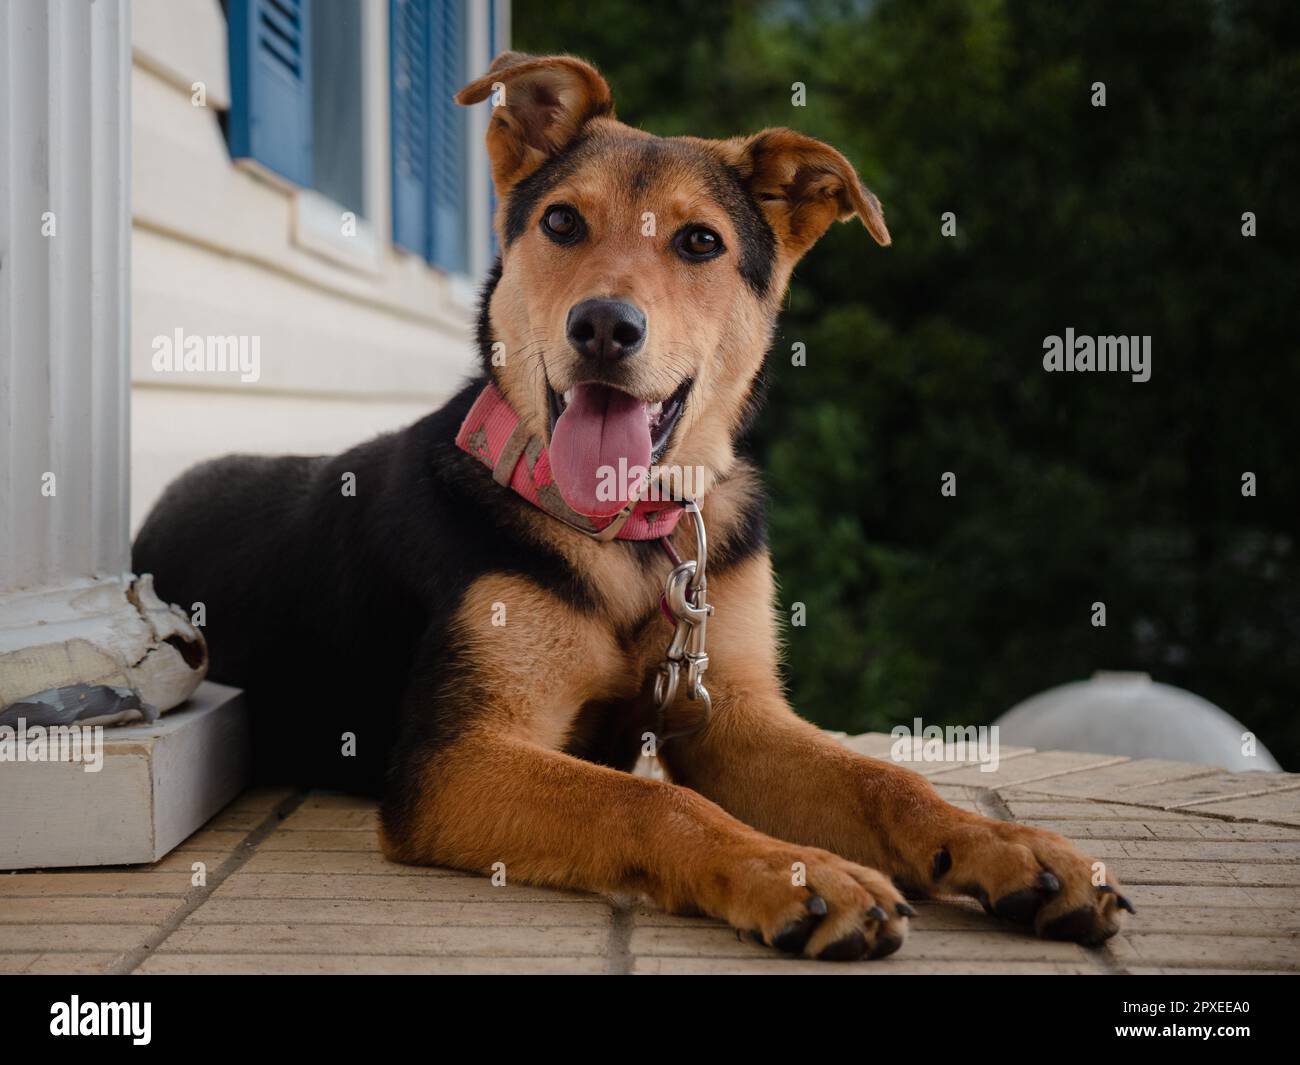 A Huntaway dog lying in a relaxed sprawl with its tongue sticking out on a porch outside a house Stock Photo